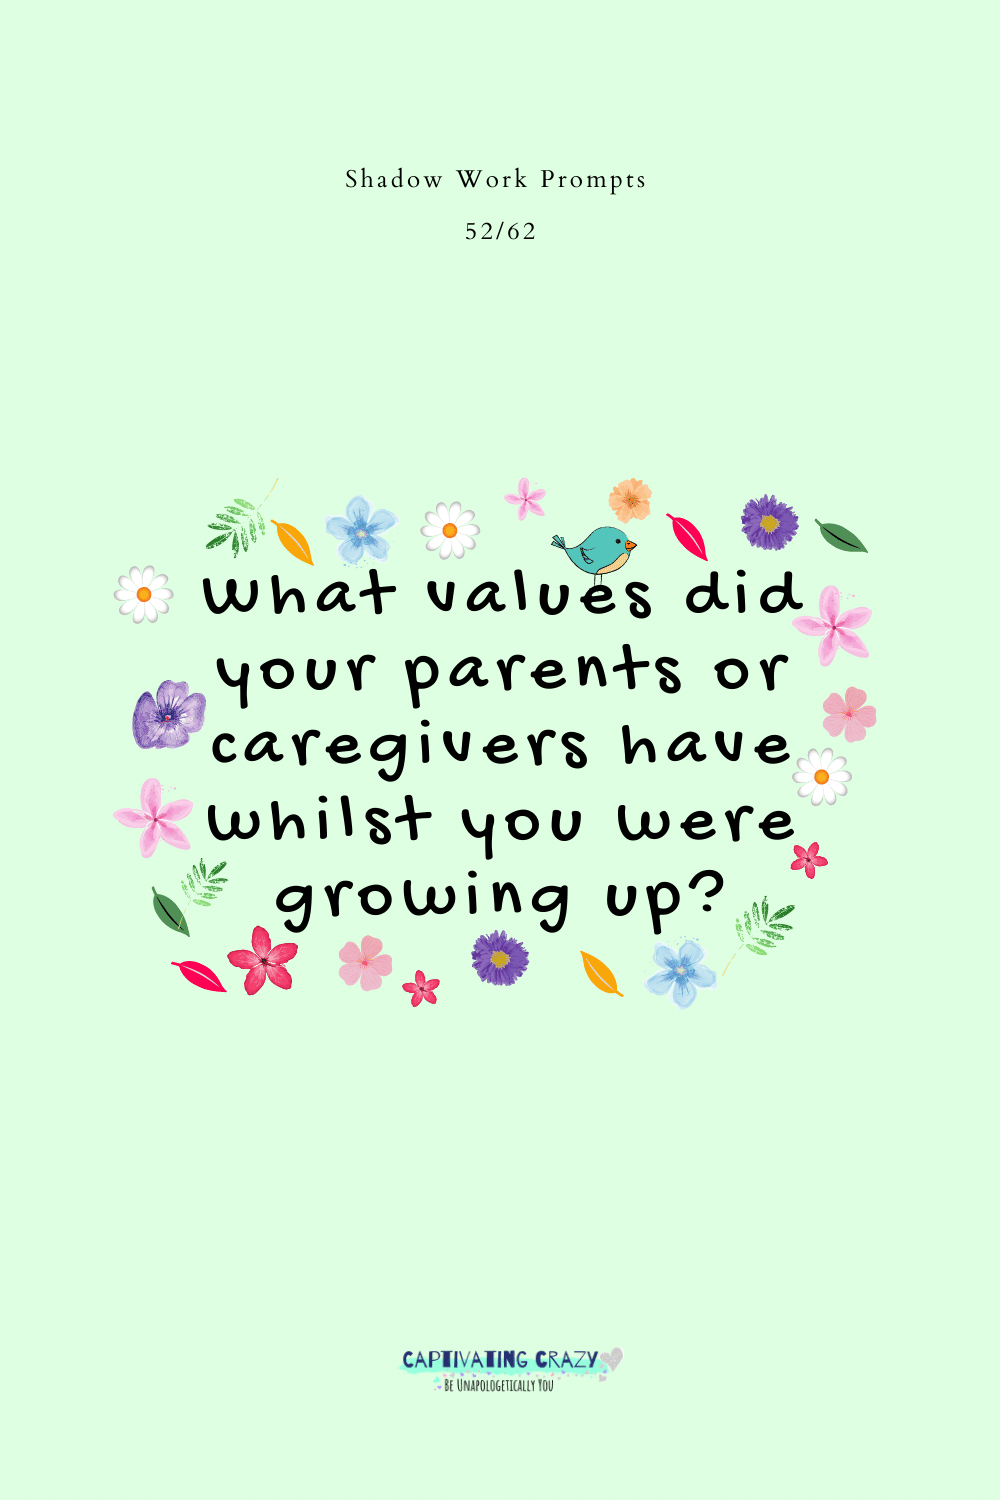 What values did your parents or caregivers have whilst you were growing up?